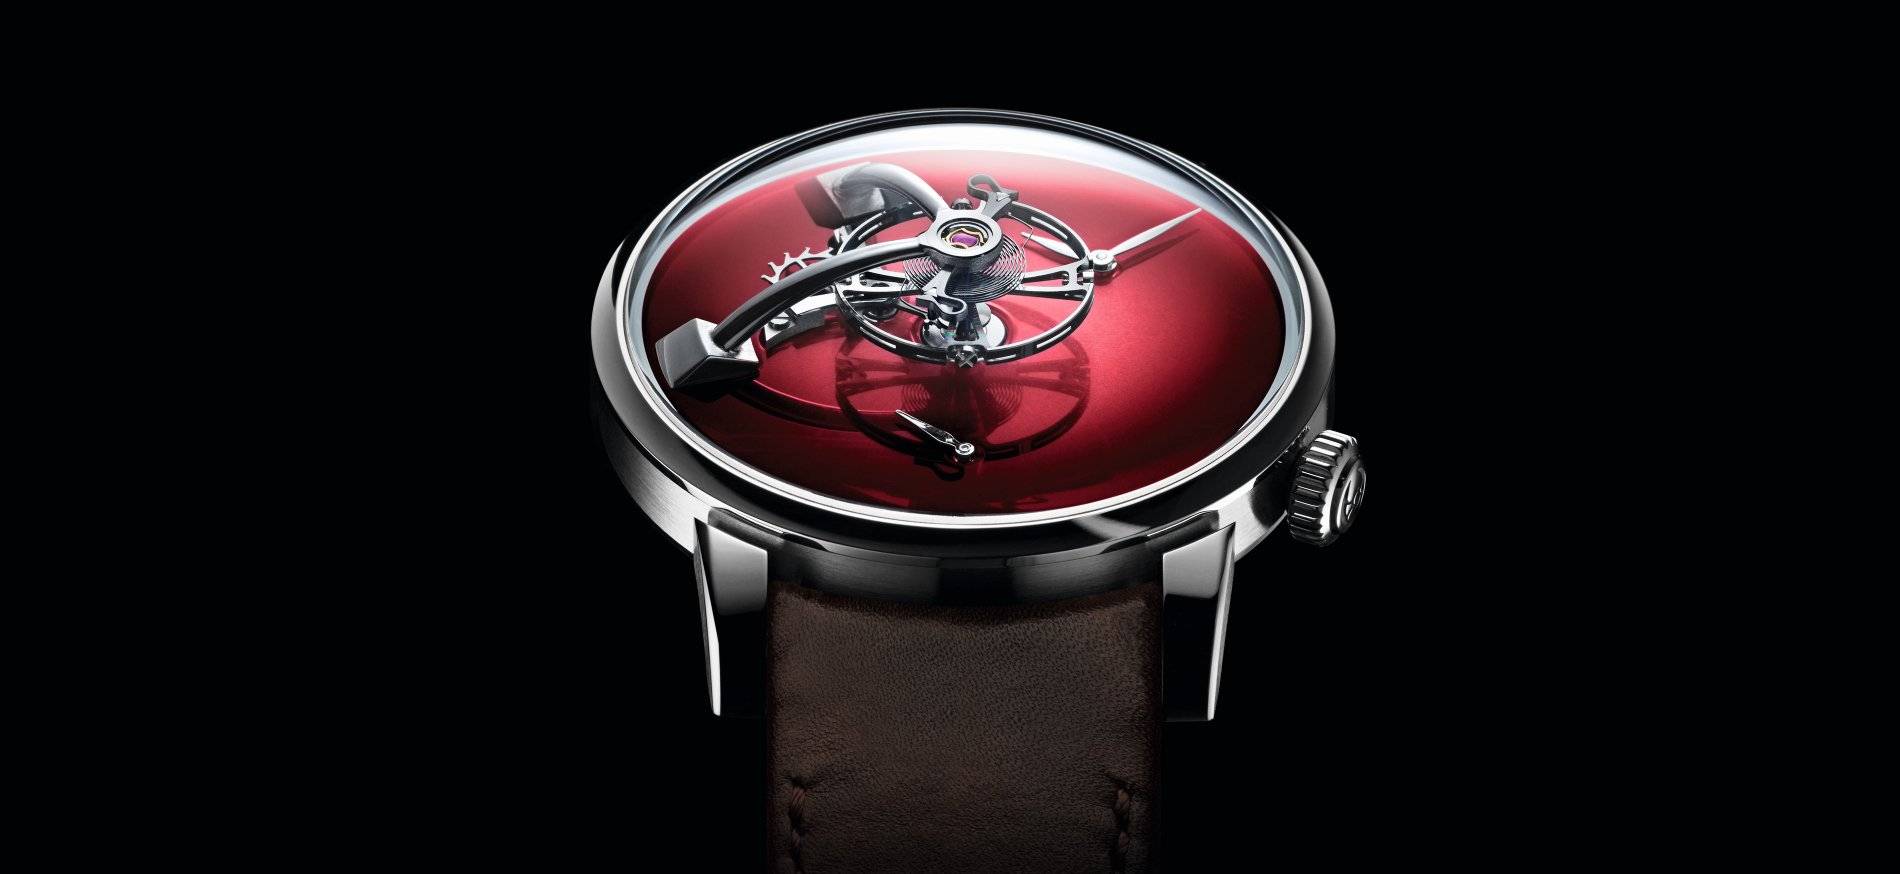 H. Moser & Cie. × MB&F